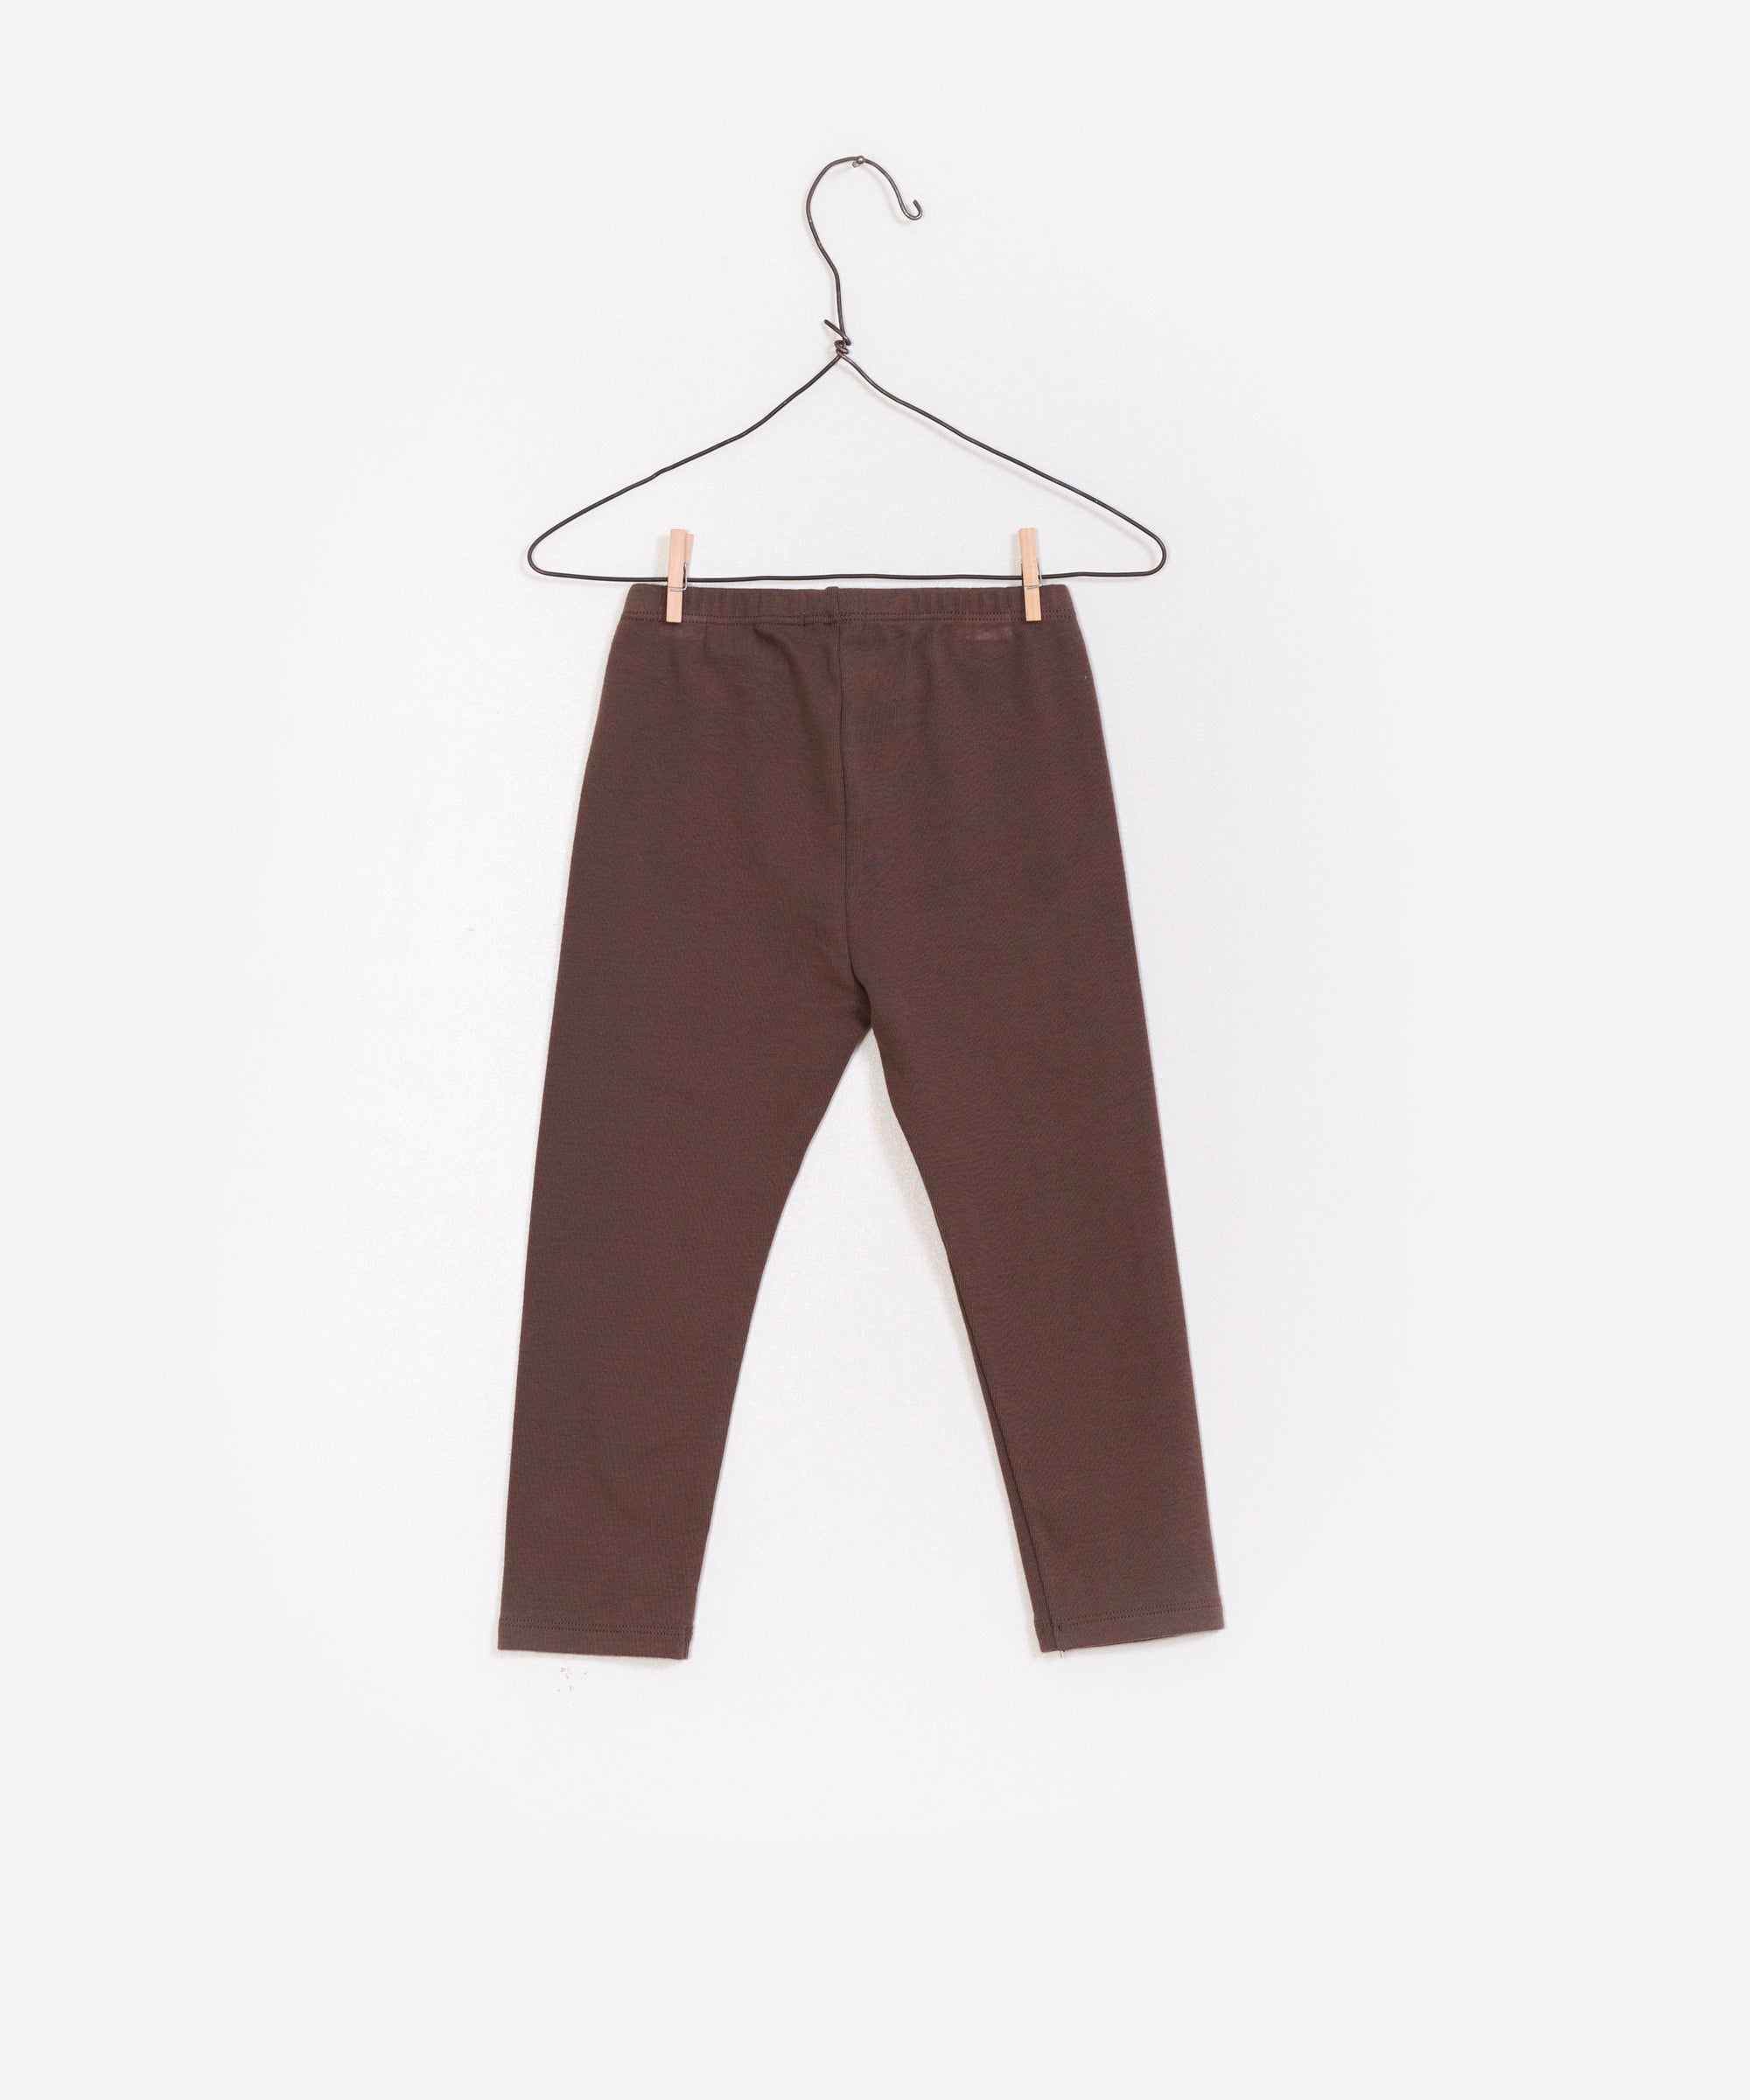 Girls Brown Cotton Trousers